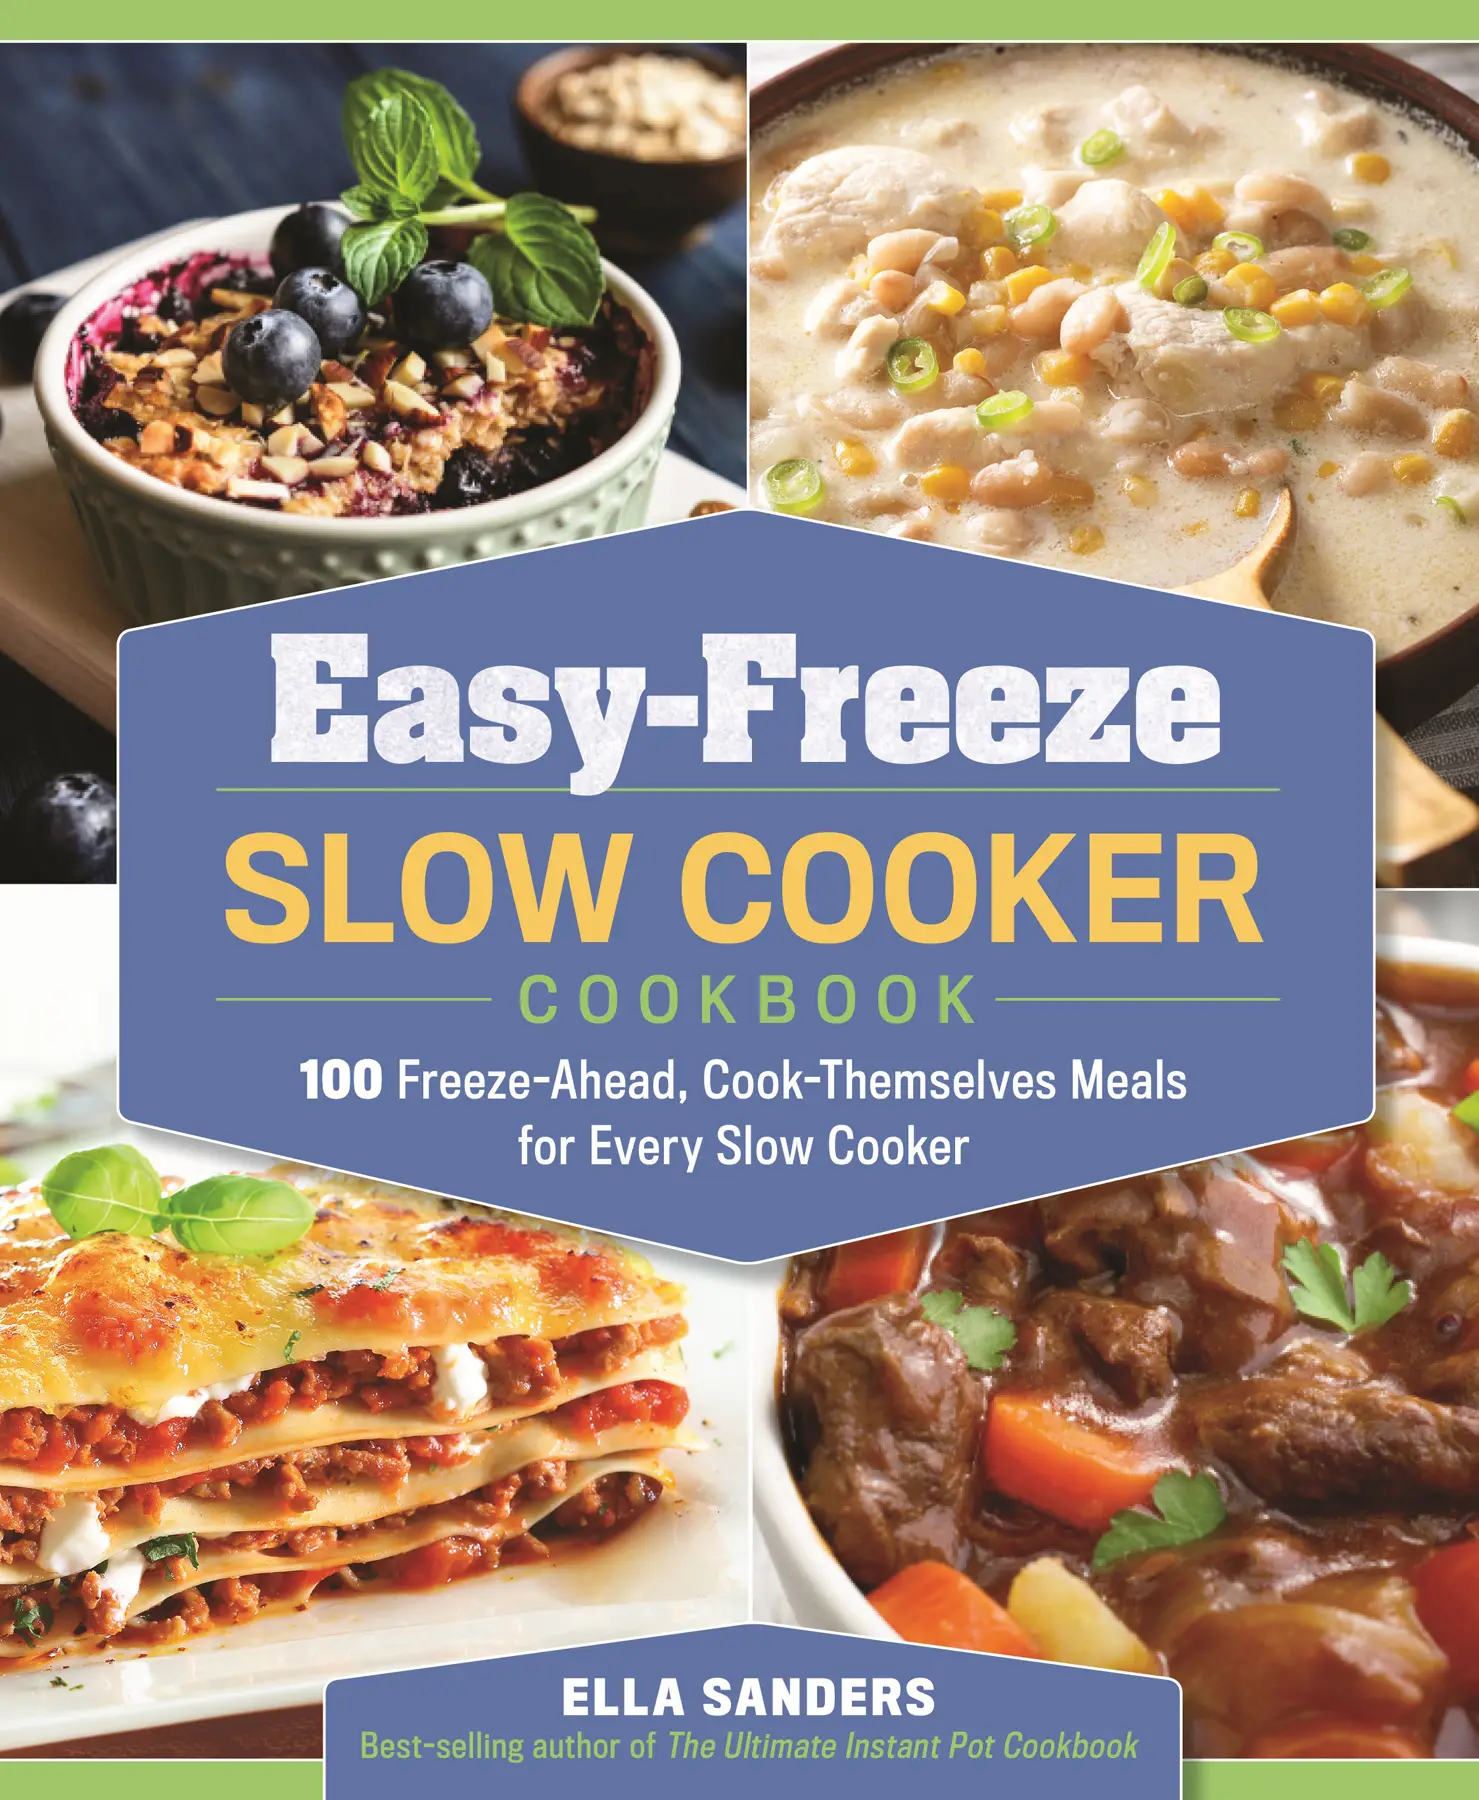 Easy-Freeze Slow Cooker Cookbook: 100 Freeze-Ahead, Cook-Themselves